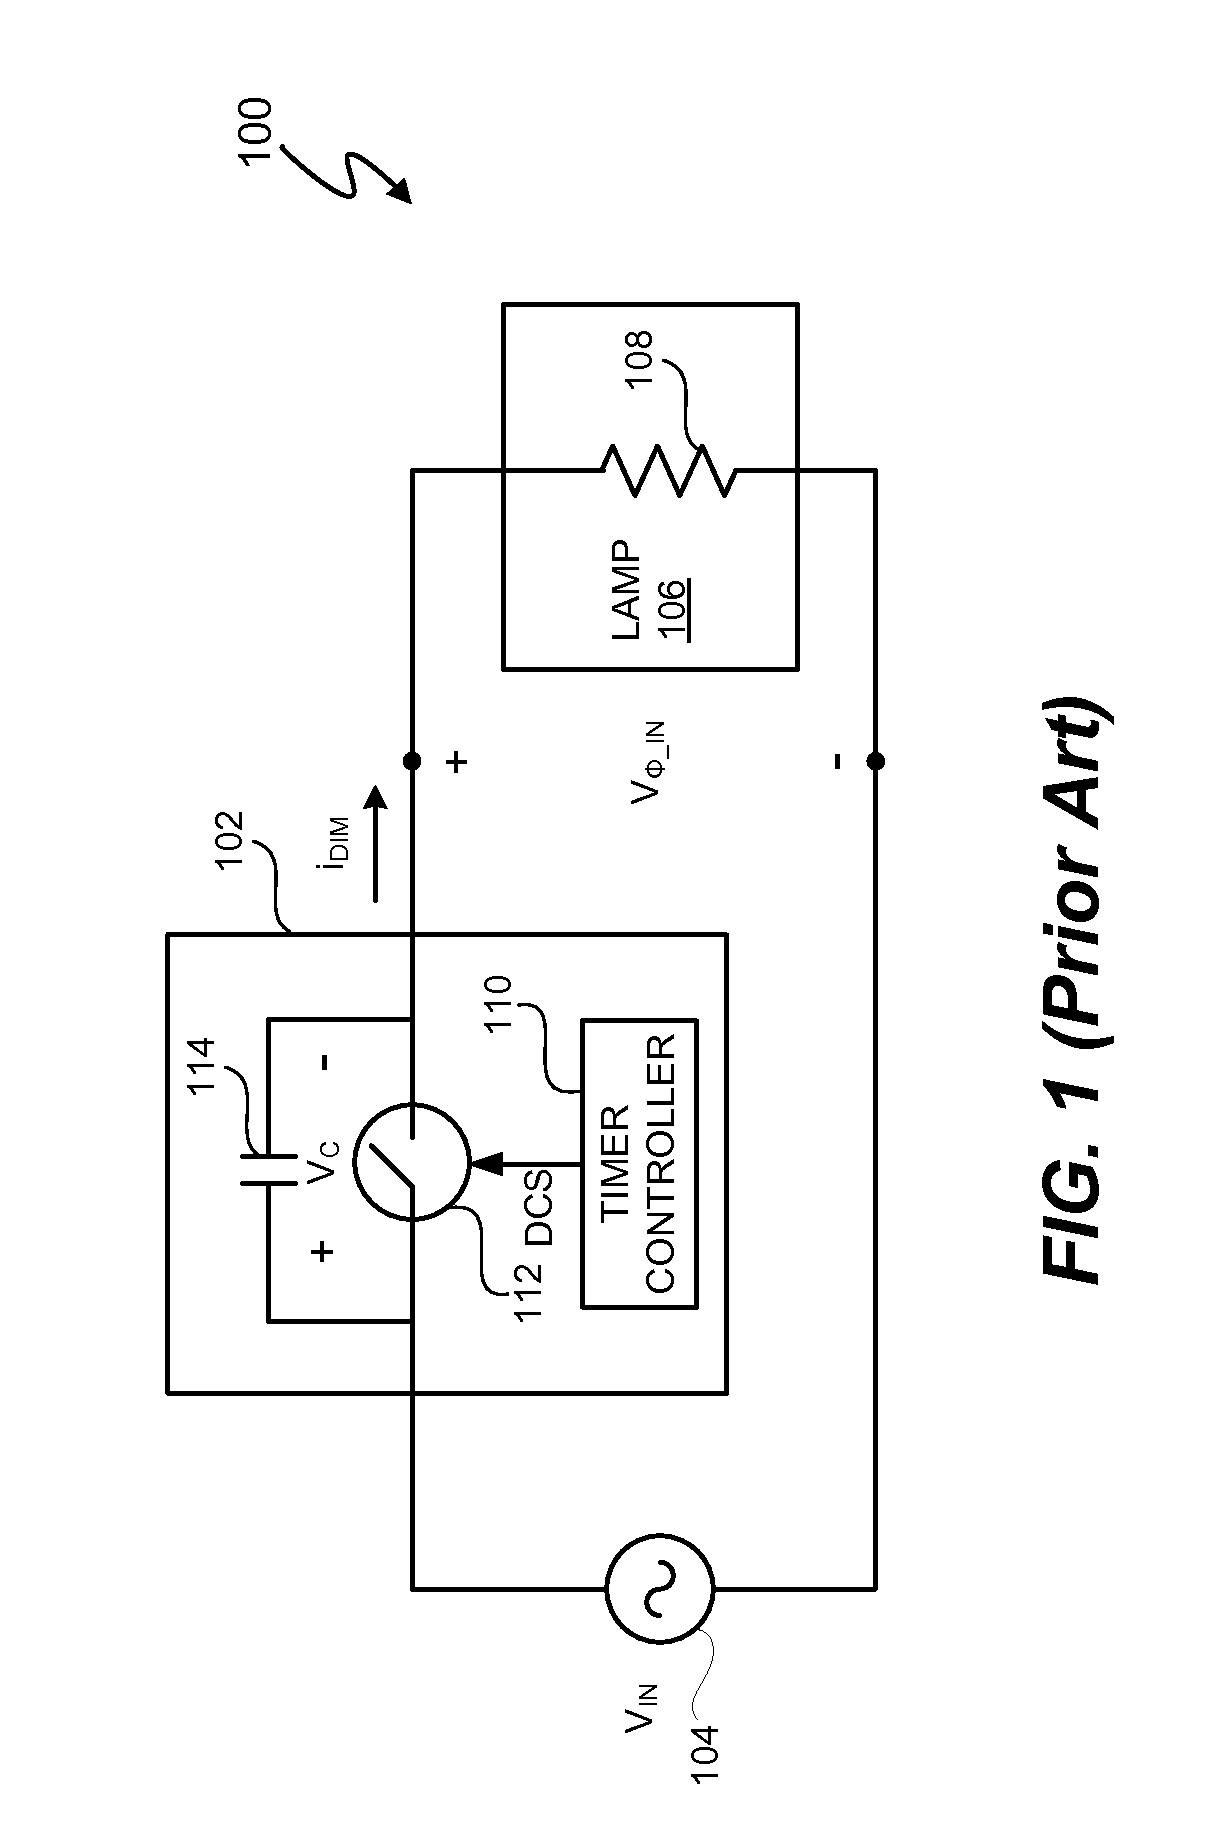 Trailing Edge Dimmer Compatibility With Dimmer High Resistance Prediction